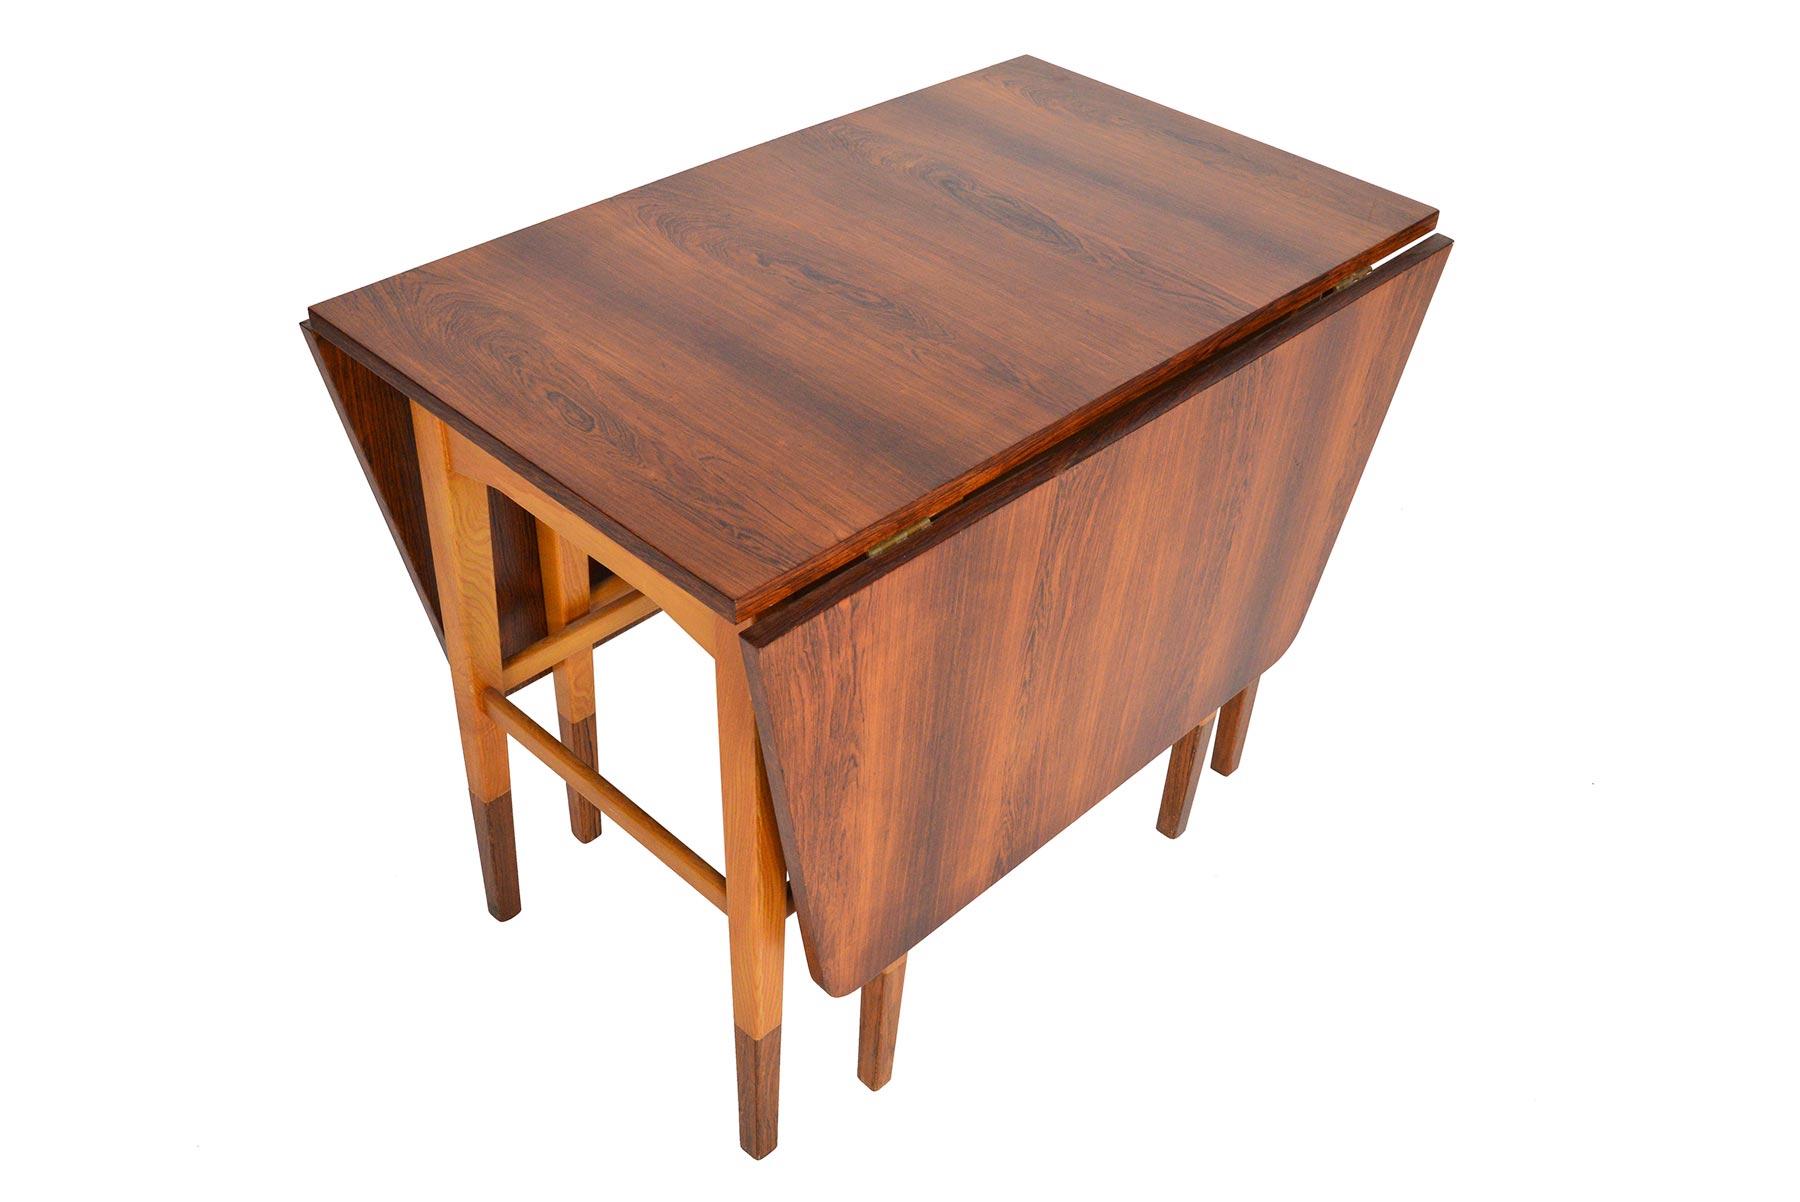 This beautifully crafted Danish modern drop leaf console table is constructed in Brazilian rosewood and solid oak. The table expands with the help of two expanding leg bases that support the leaves. Tapered oak legs are capped in rosewood. In